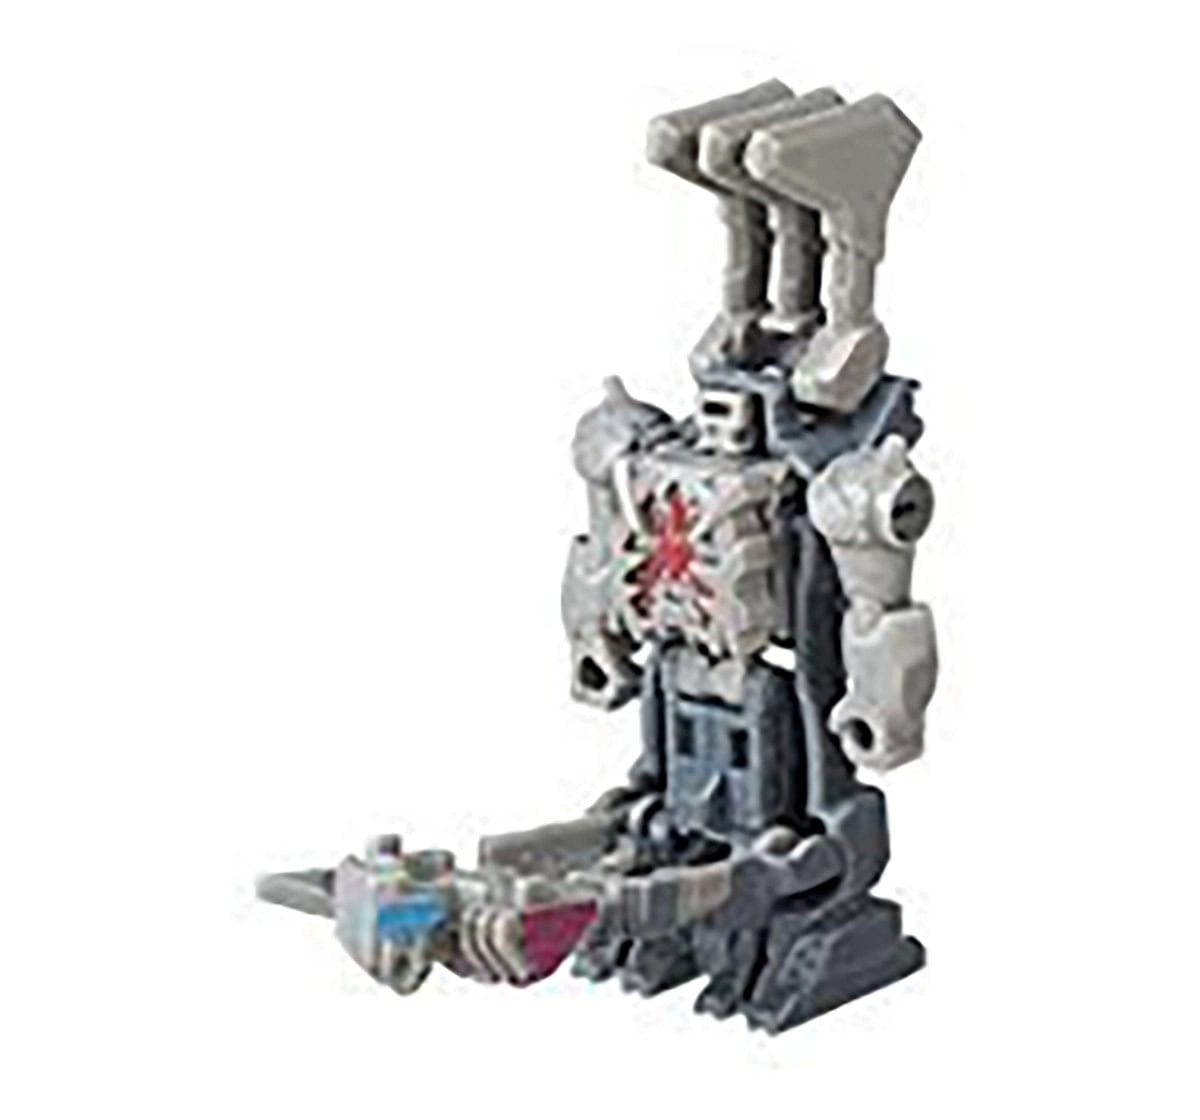 Transformers Prime War Action Figure Assorted for Kids age 8Y+ 